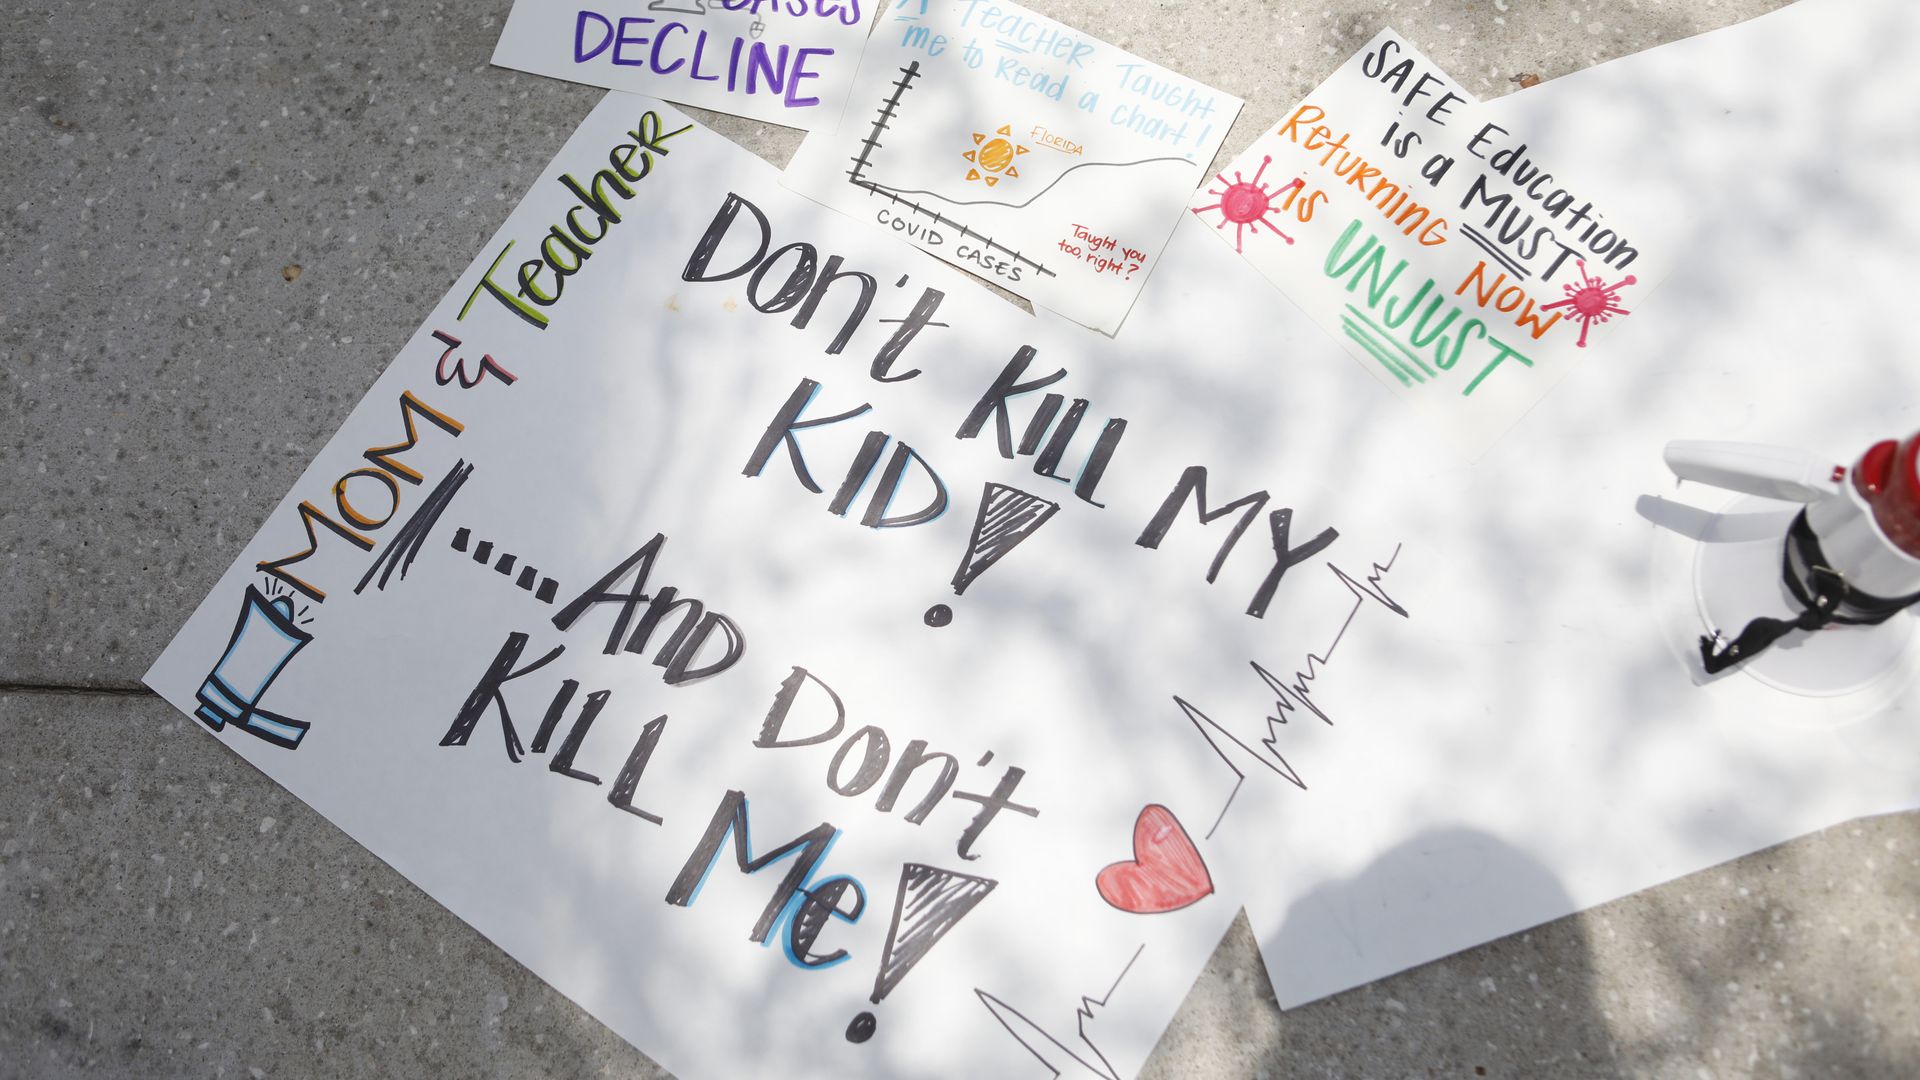 Protest signs on the ground against the reopening of the schools during the coronavirus pandemic